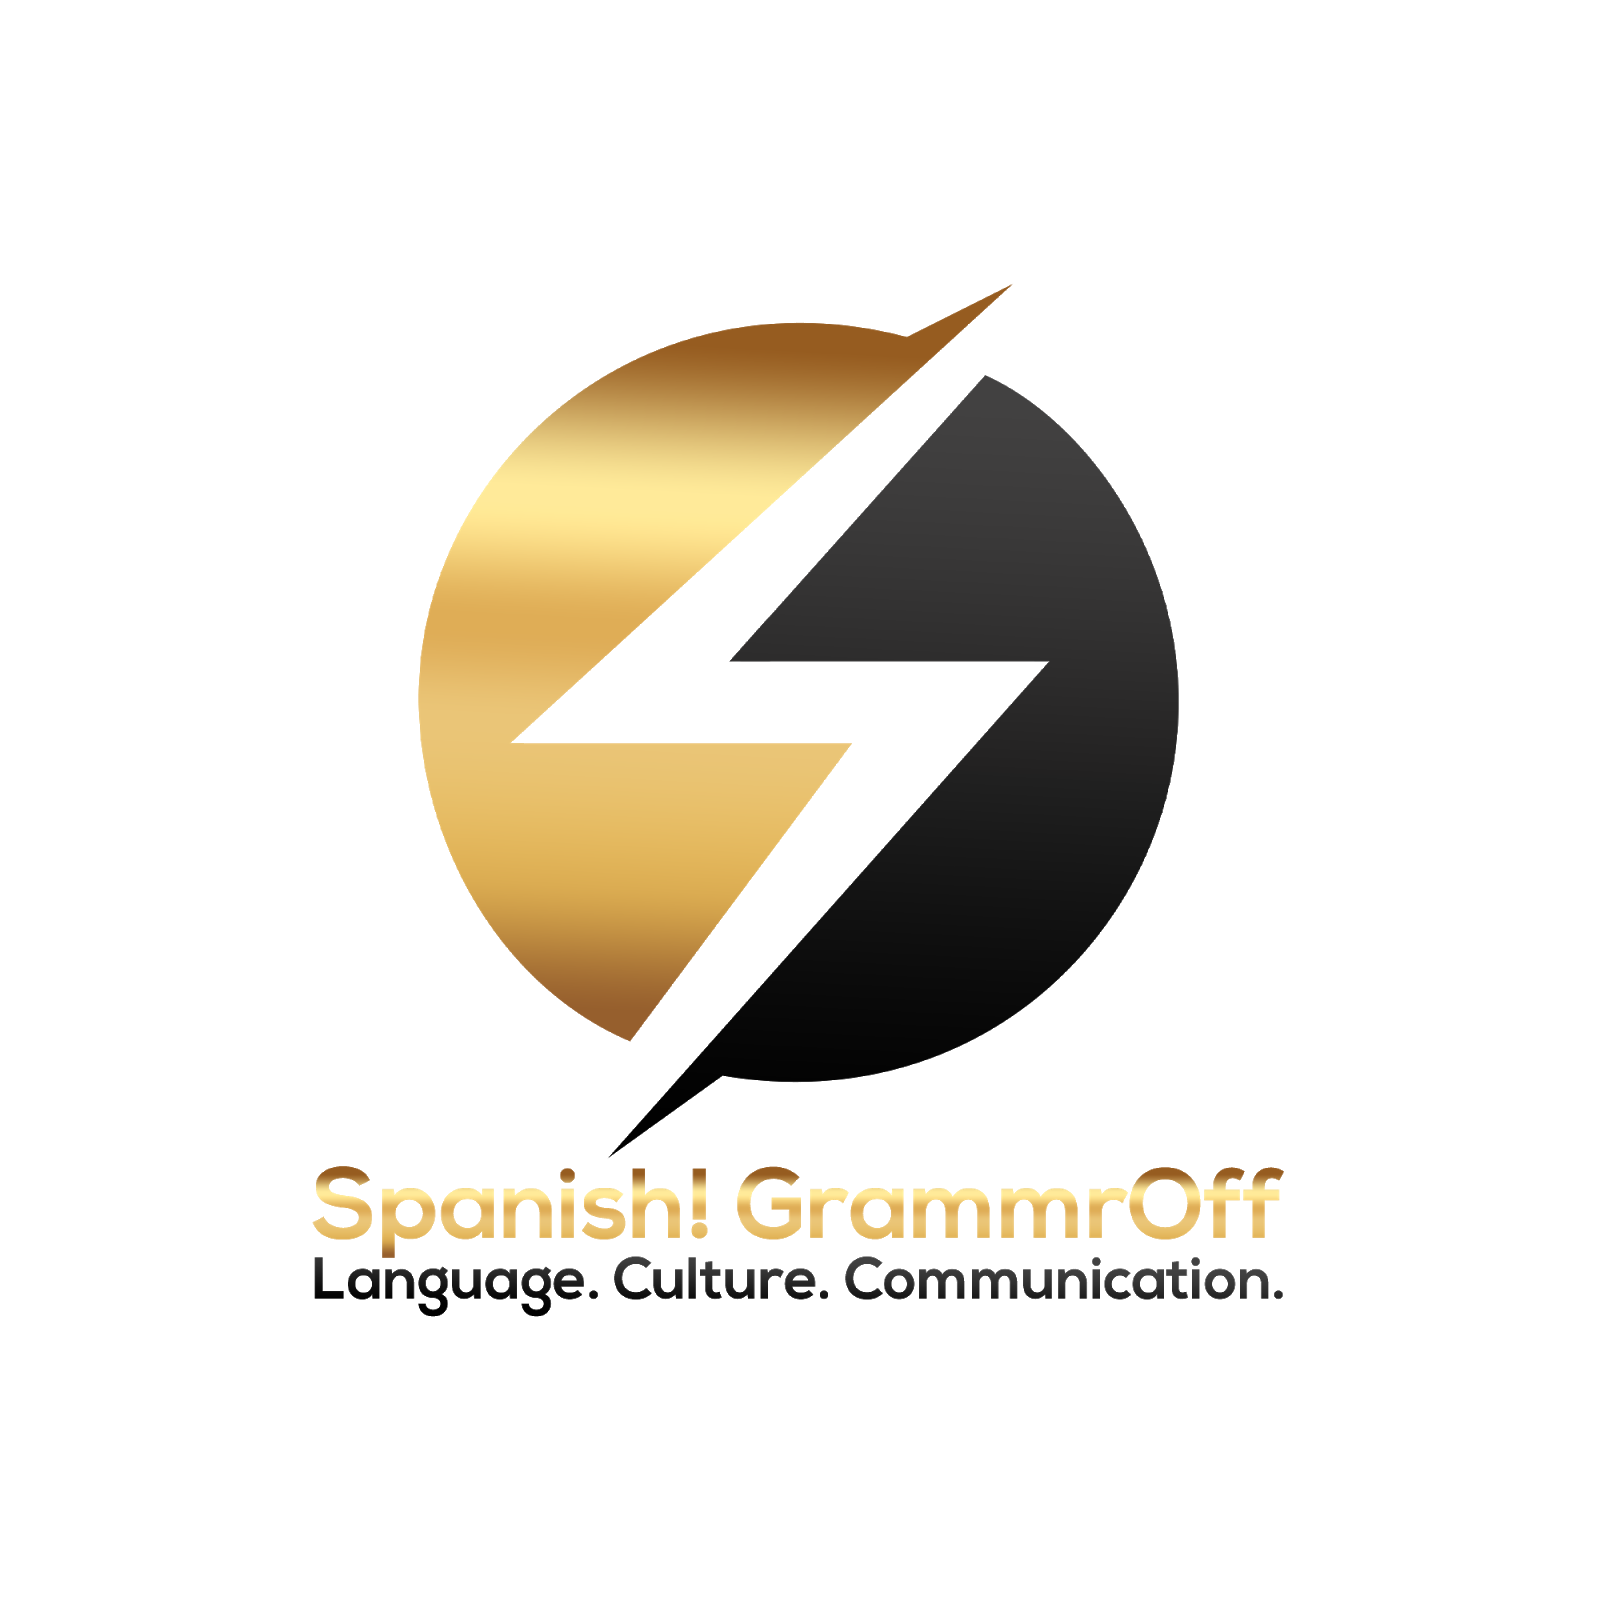 Using An Approach Called GrammrOff: Spanish Naturally Acquired